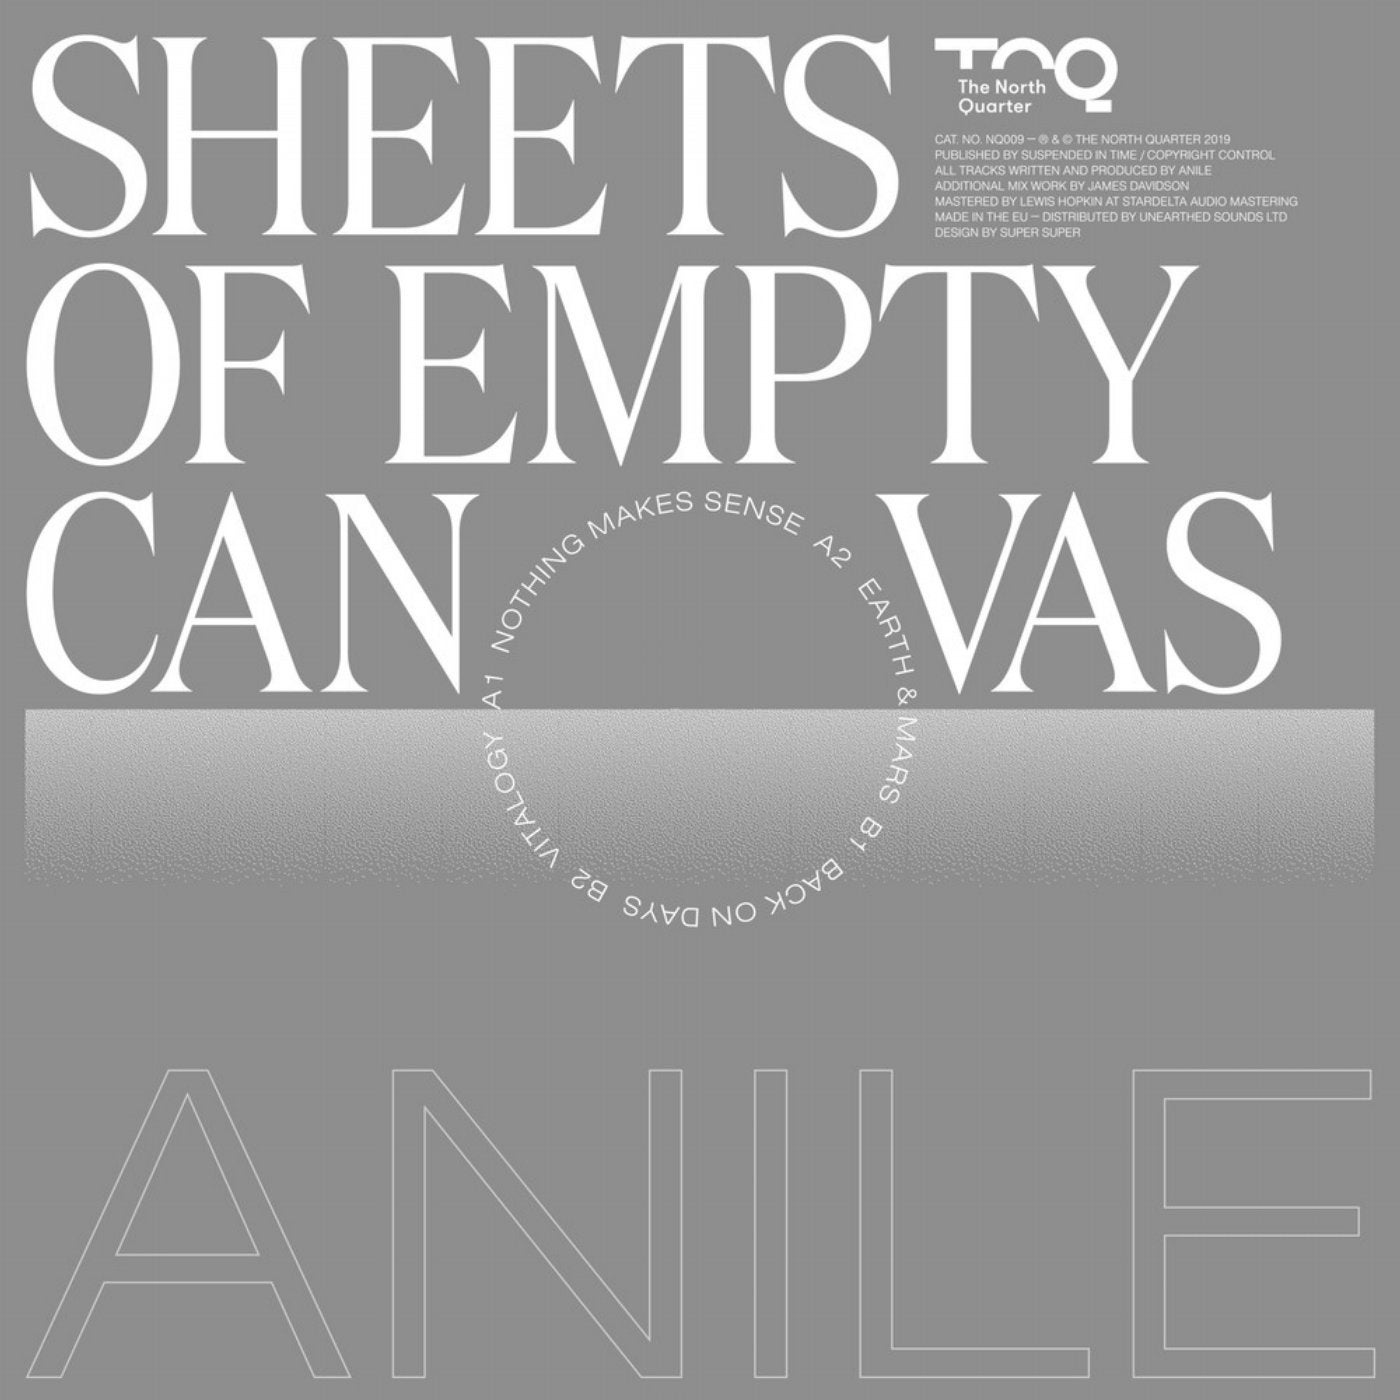 Sheets of Empty Canvas